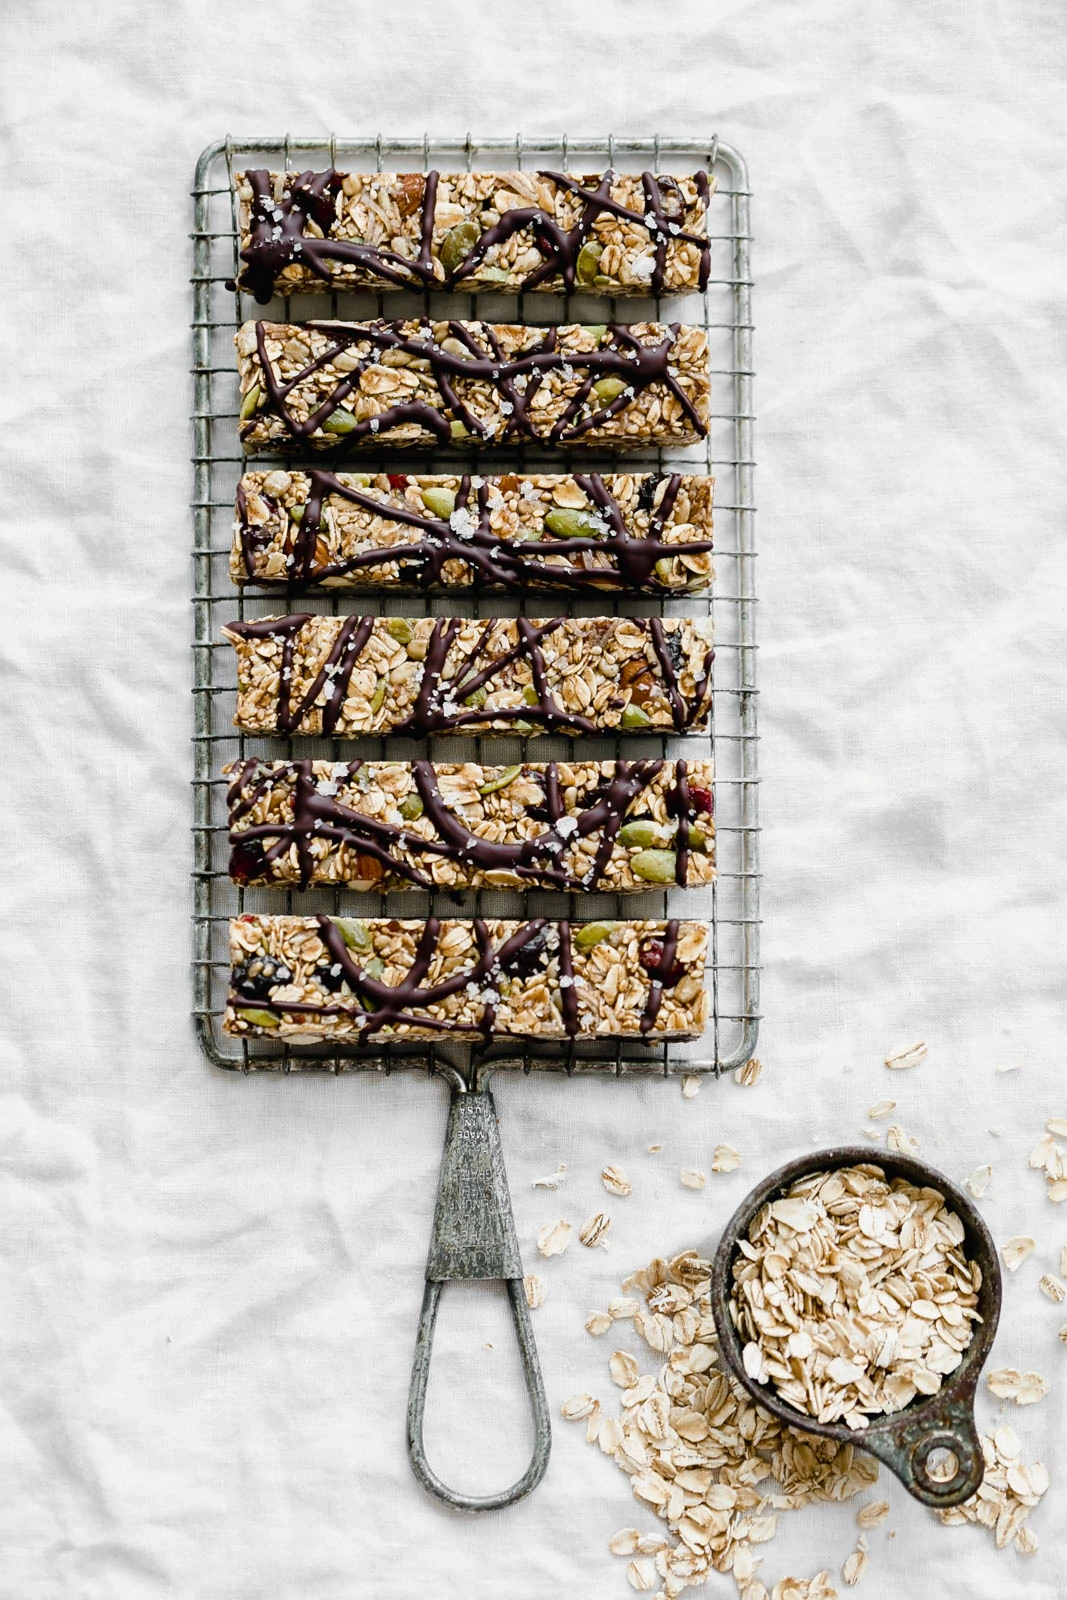 Raw Seedy Granola Bars made with oats, sunflower seeds, pepitas, sesame seeds, almonds, apricots, and honey, topped with a drizzle of dark chocolate